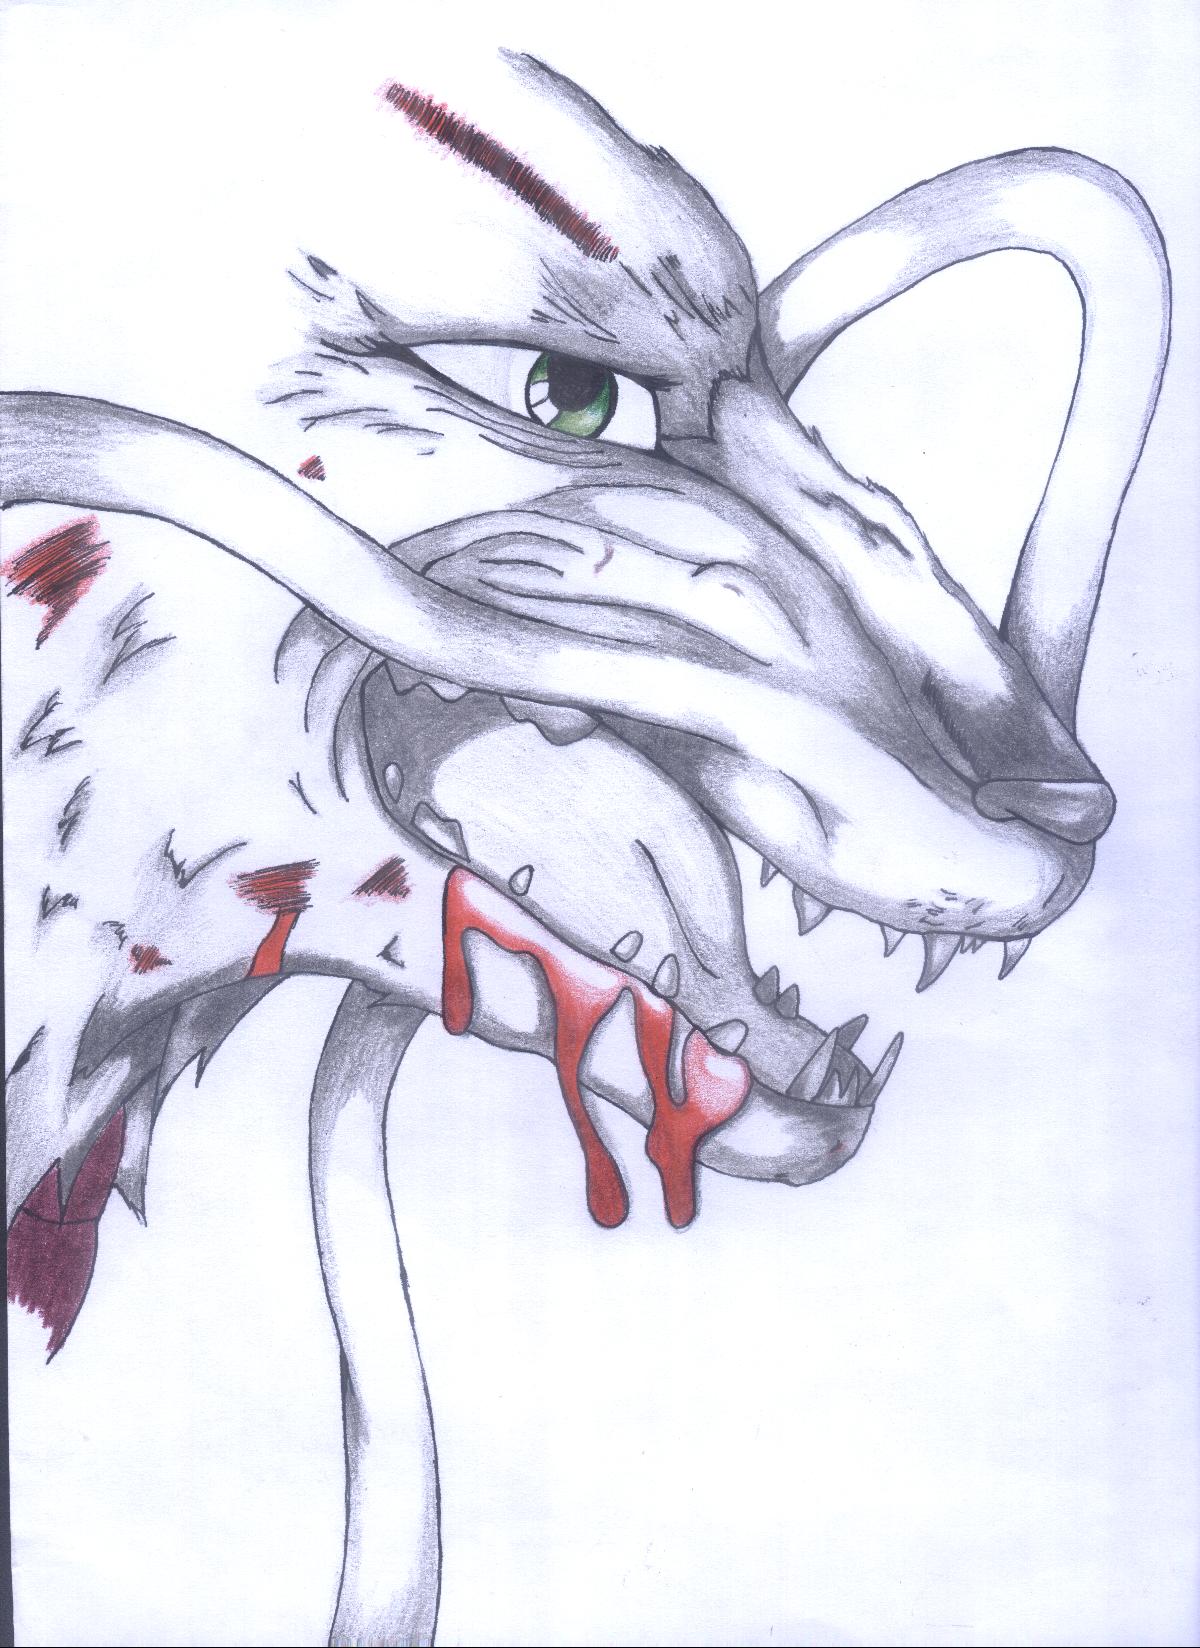 Haku, in Colored Pencil by Aquanistic